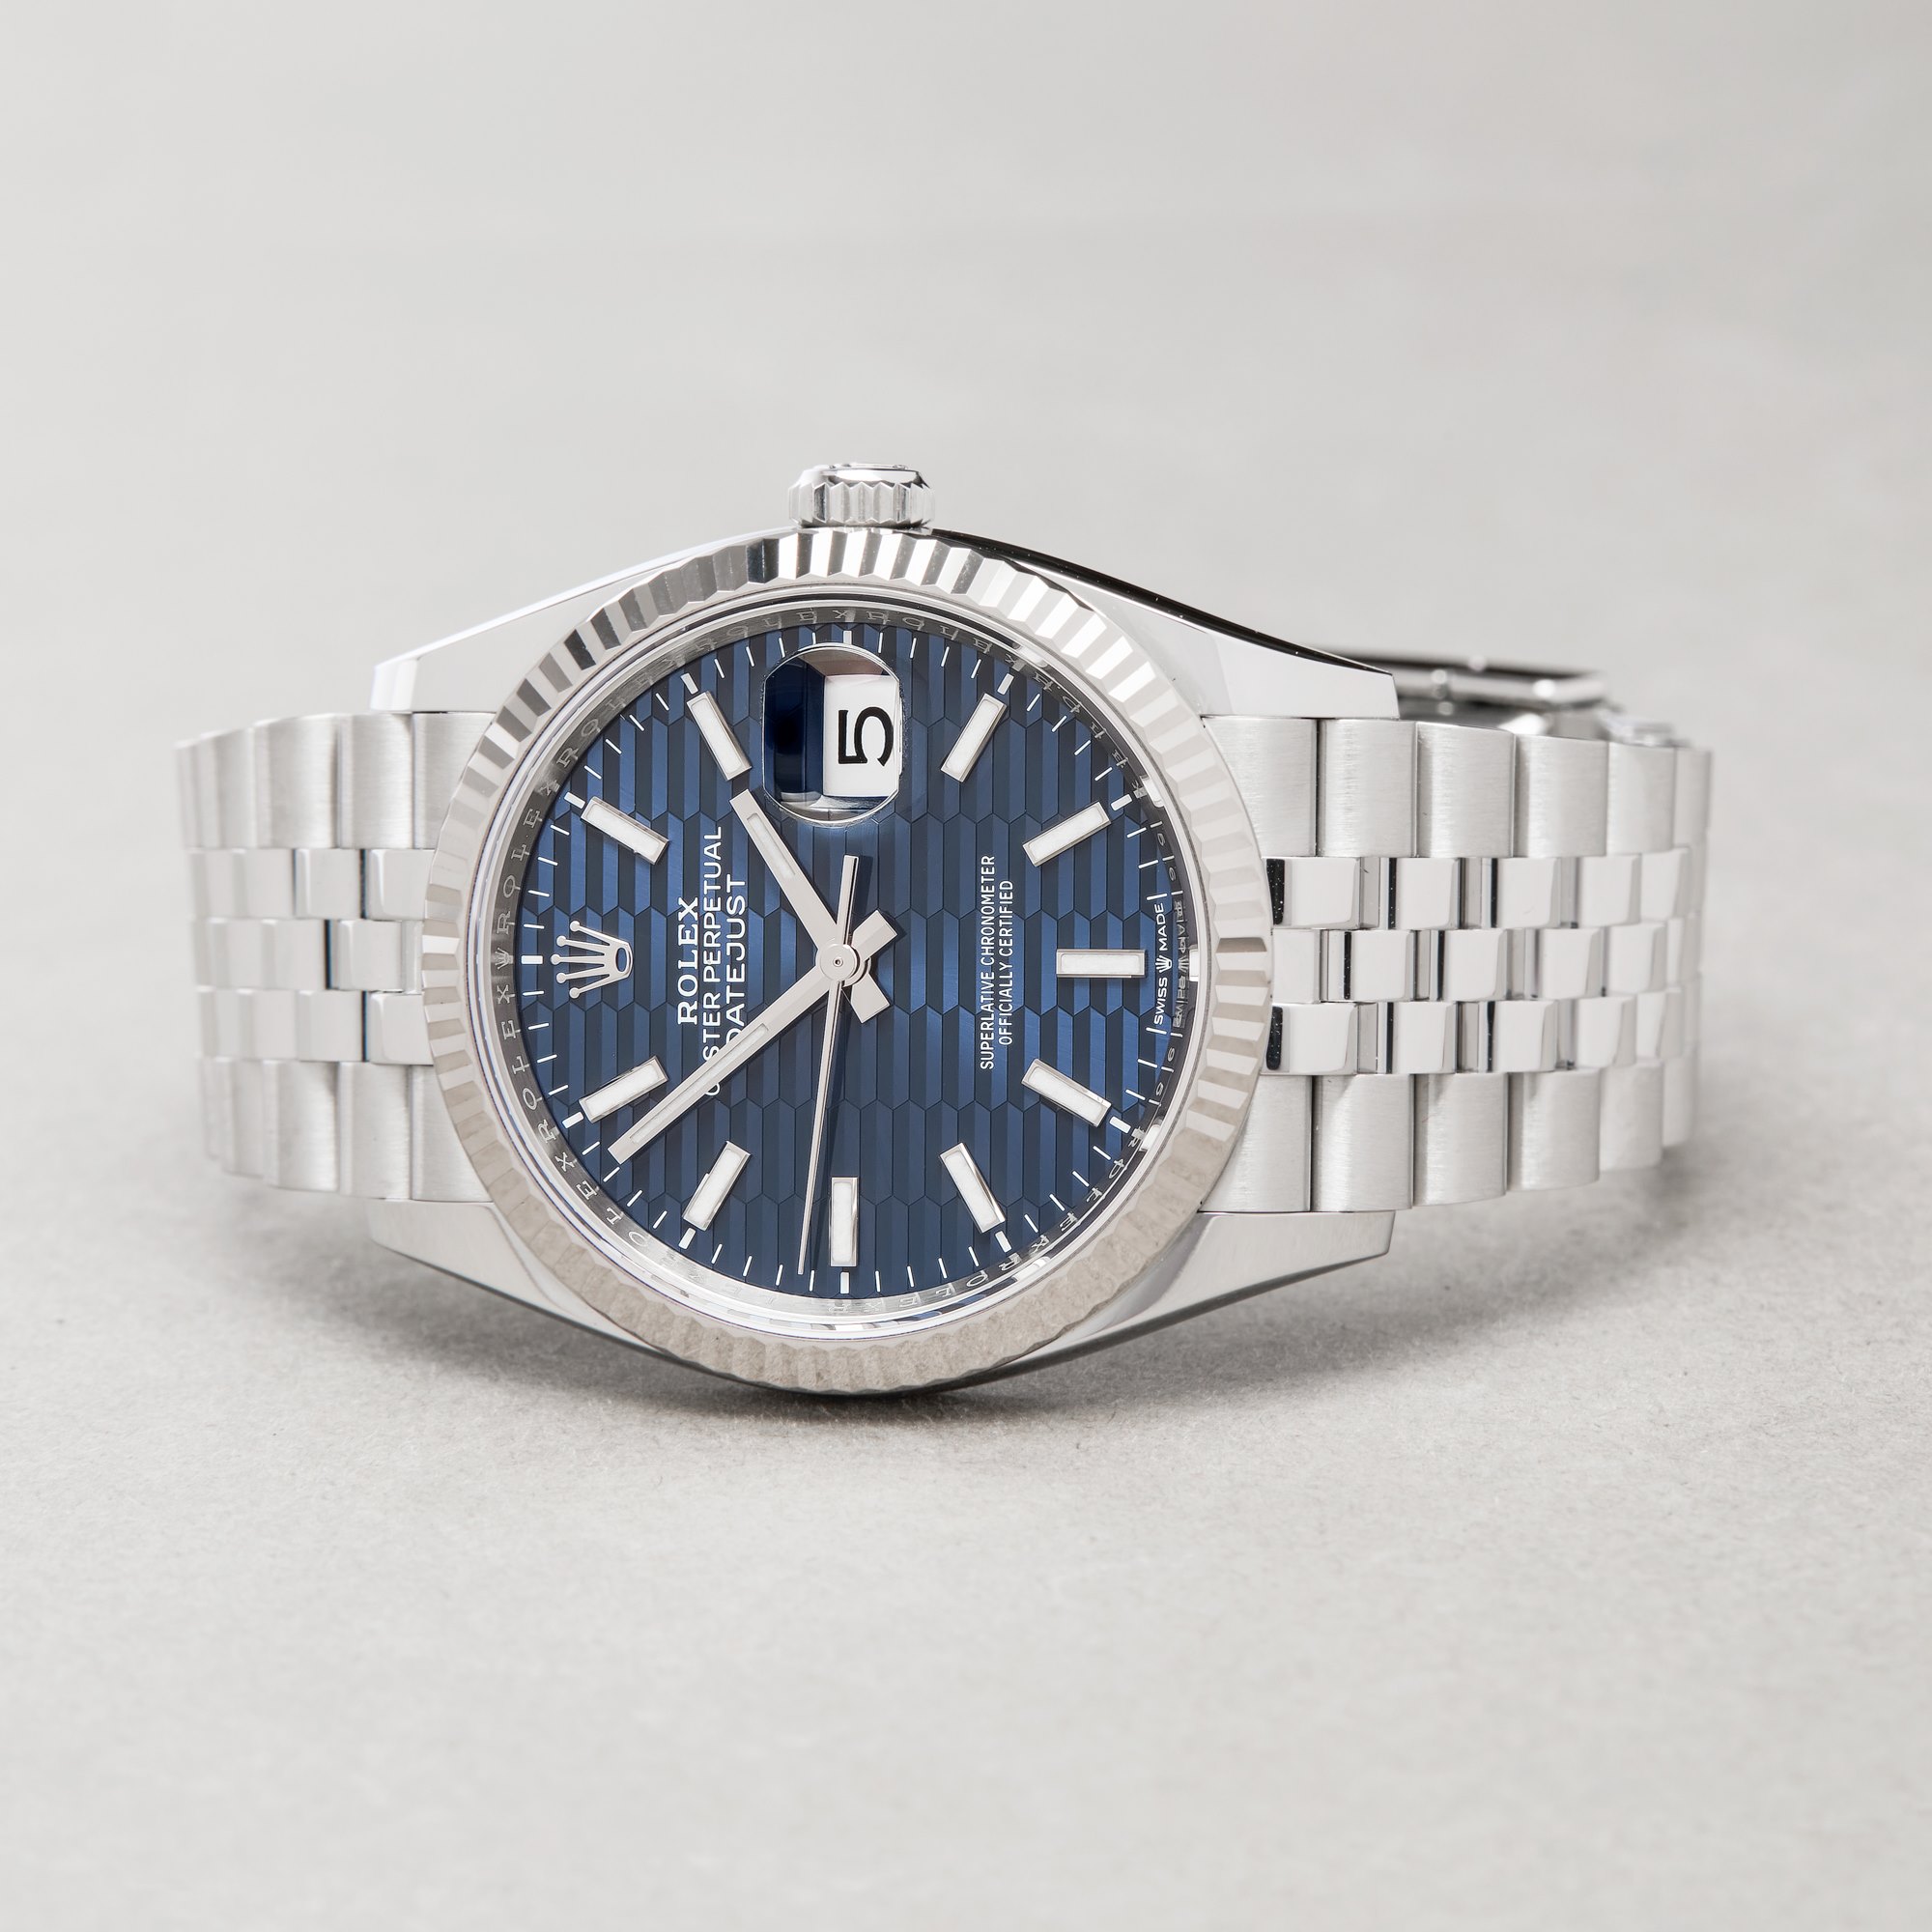 Rolex Datejust 36 ‘BLUE MOTIF DIAL’ White Gold & Stainless Steel 126234